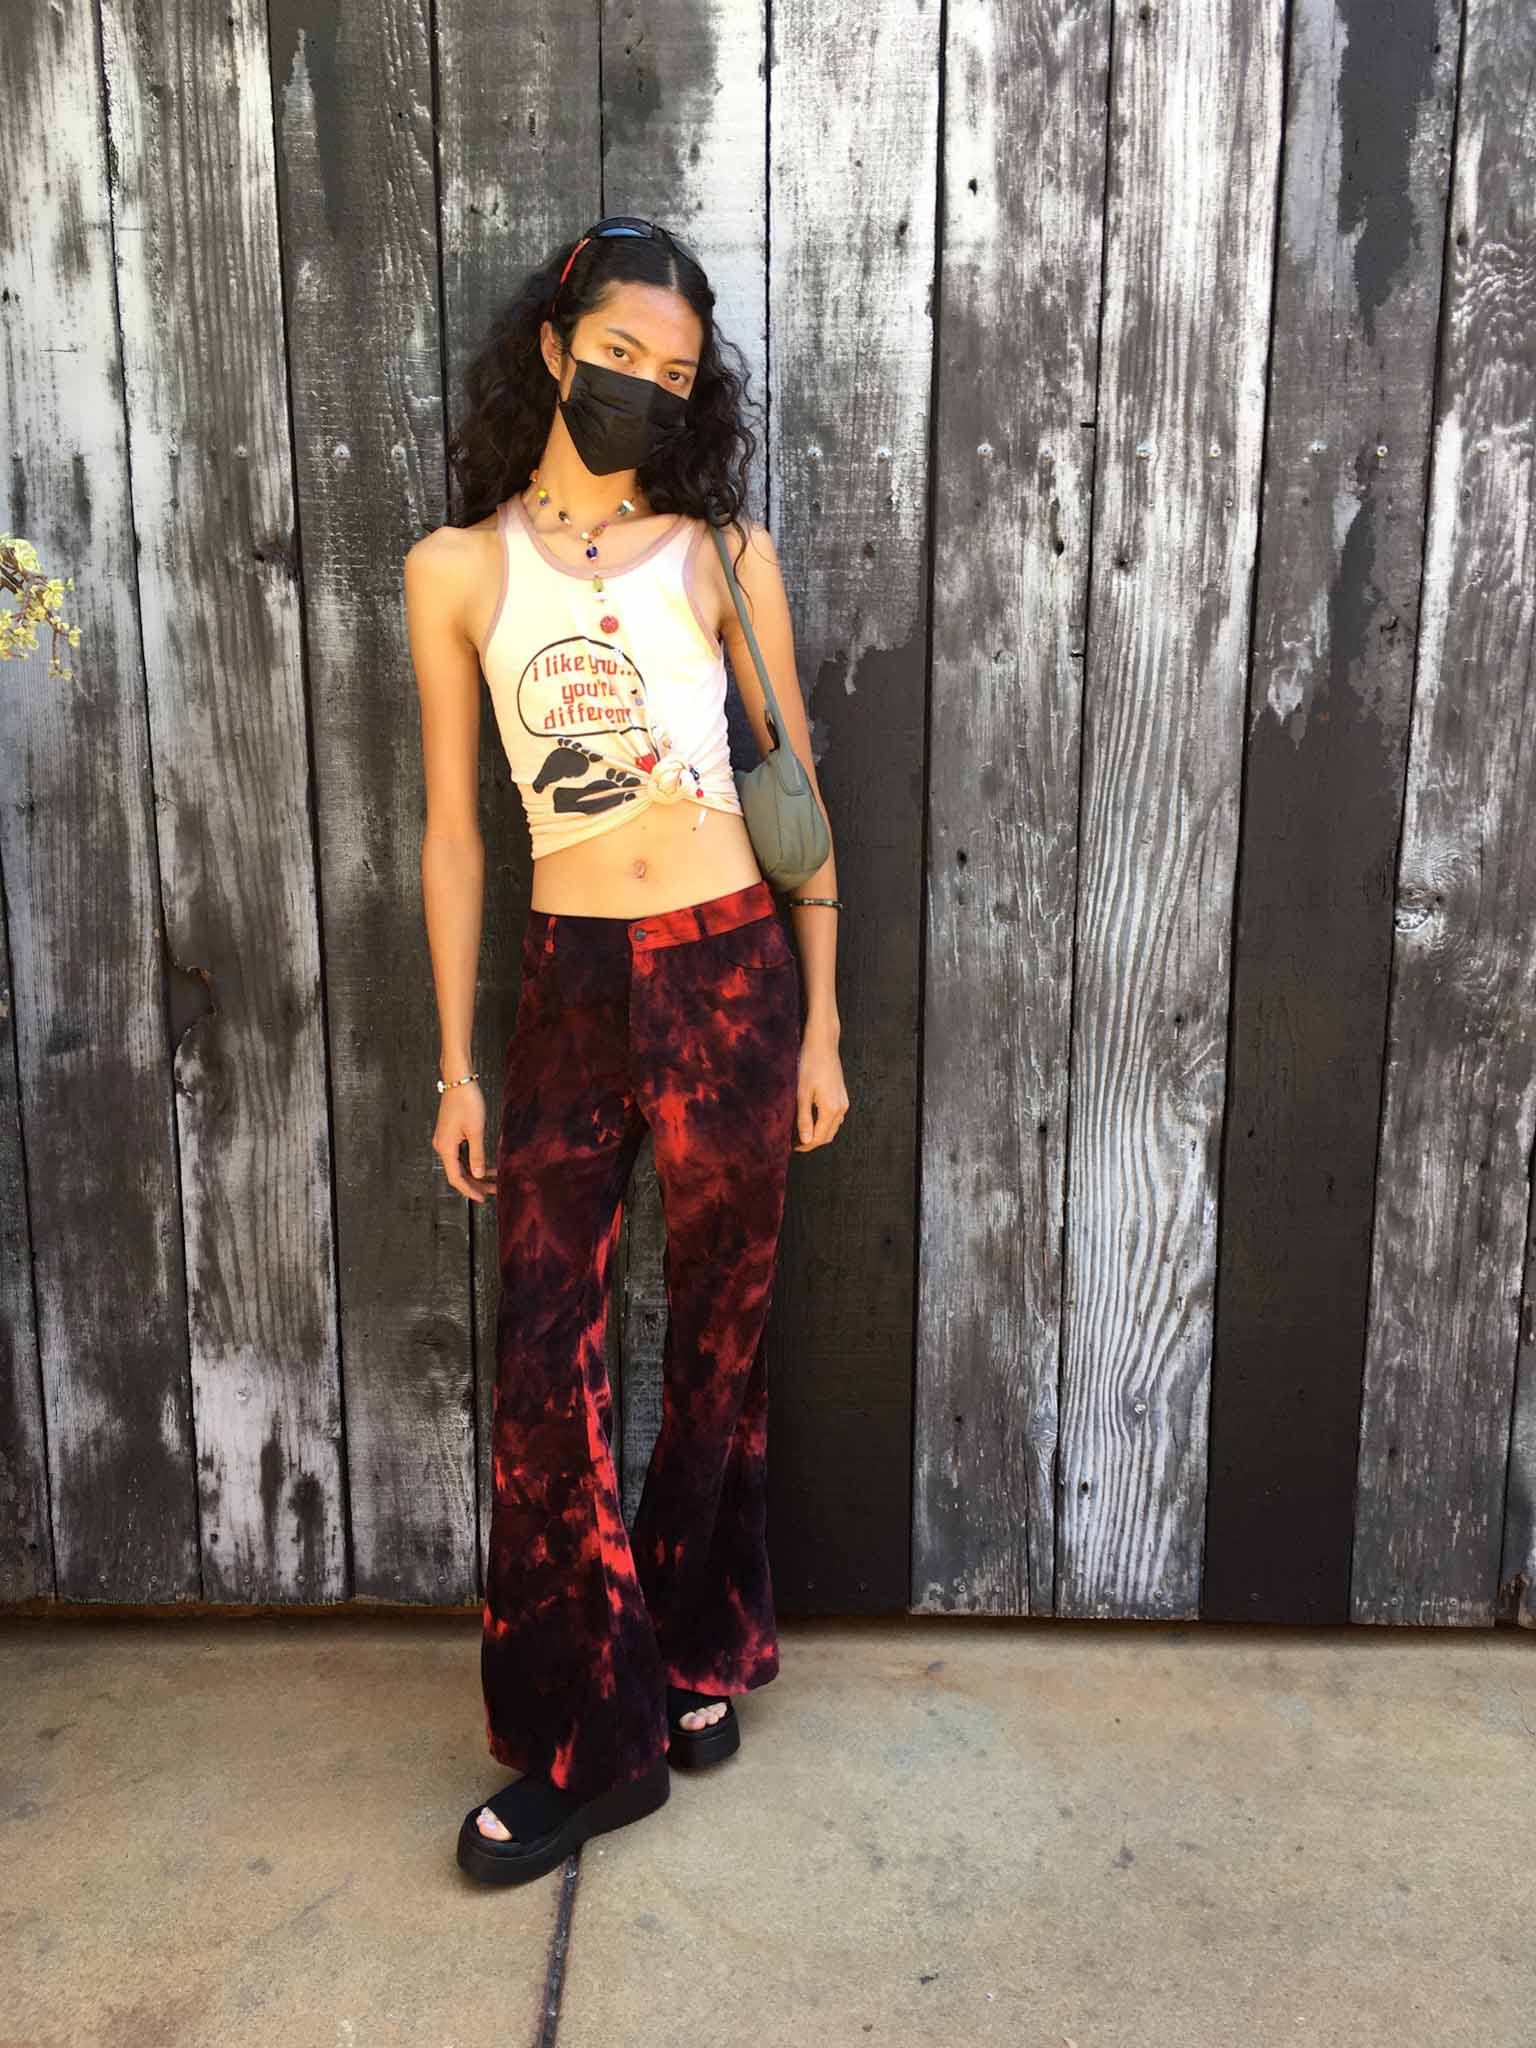 Girl Posing wearing red low-rise pants and a graphic tank top